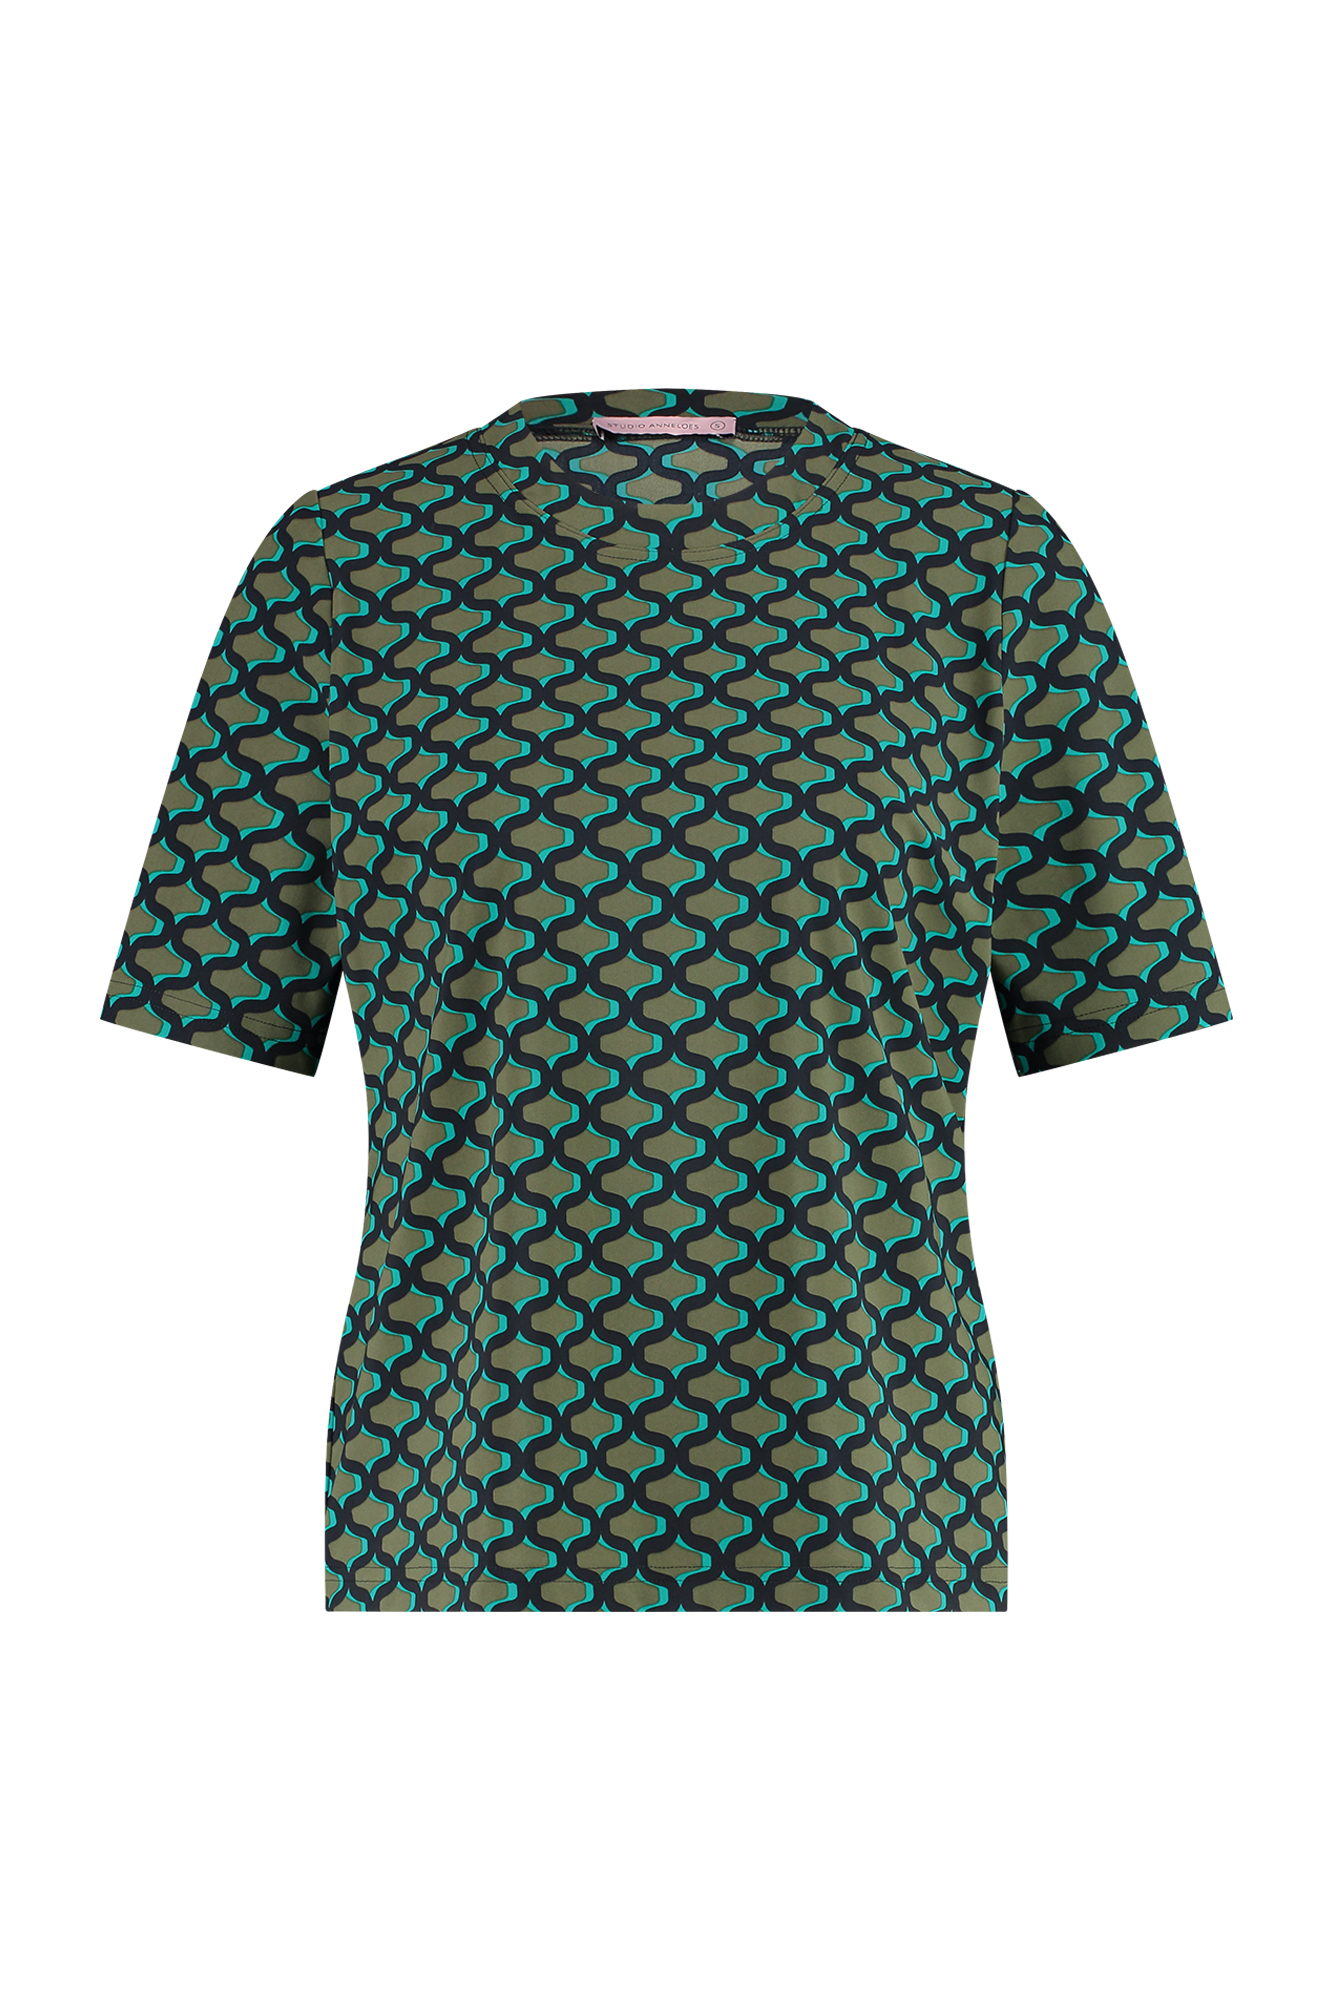 Studio Anneloes Travel Graphic Tee Army/emerald